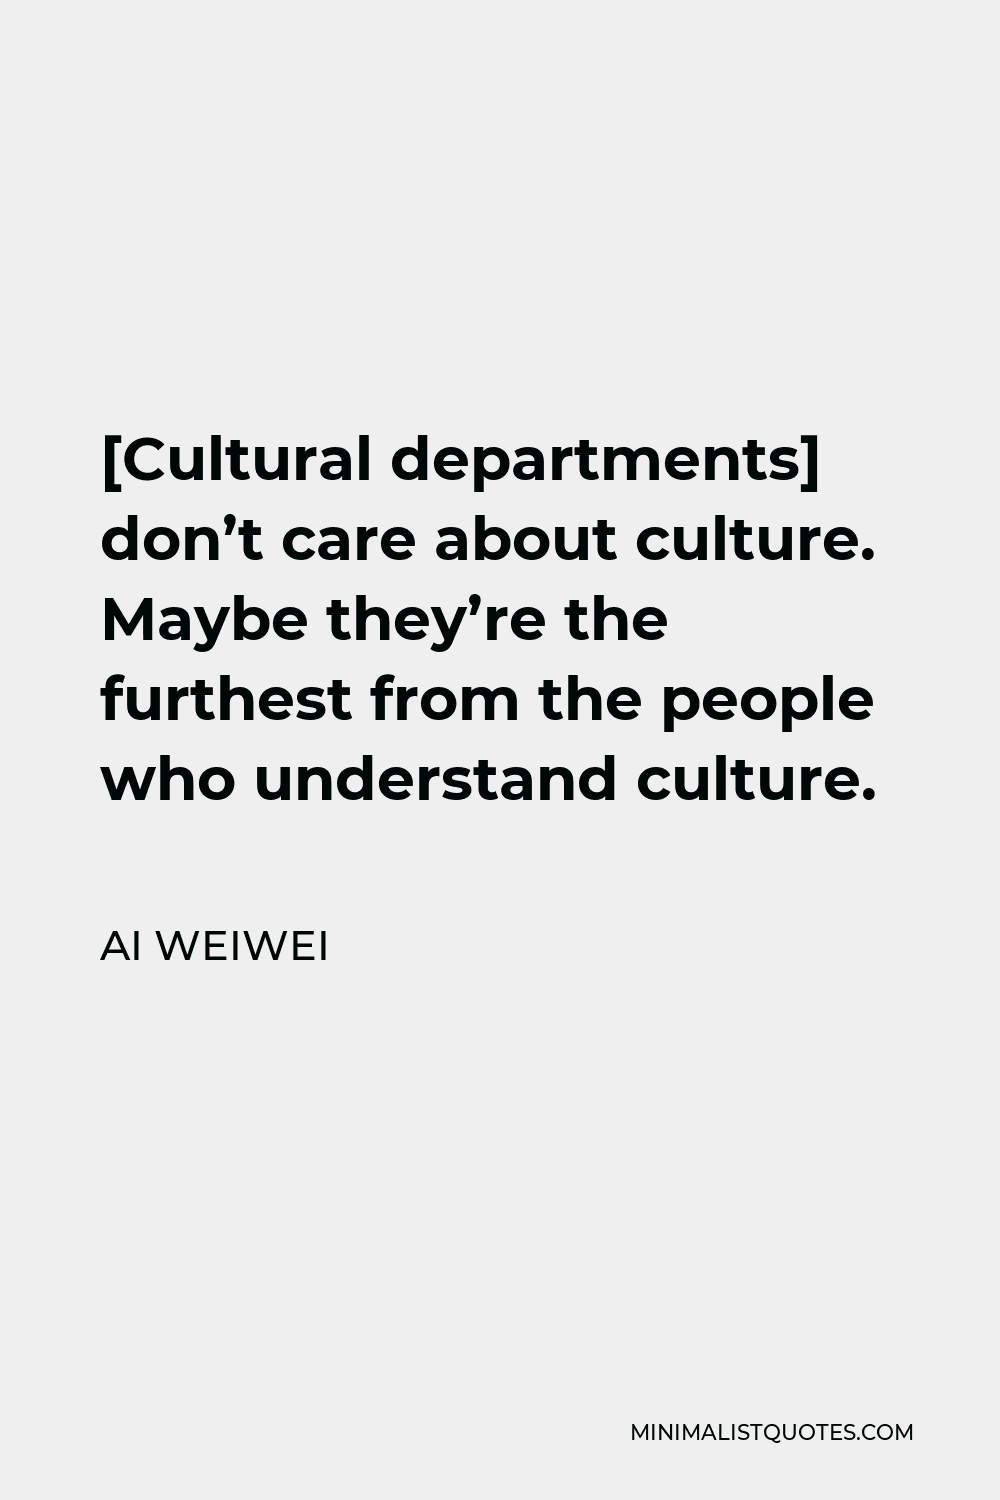 Ai Weiwei Quote - [Cultural departments] don’t care about culture. Maybe they’re the furthest from the people who understand culture.